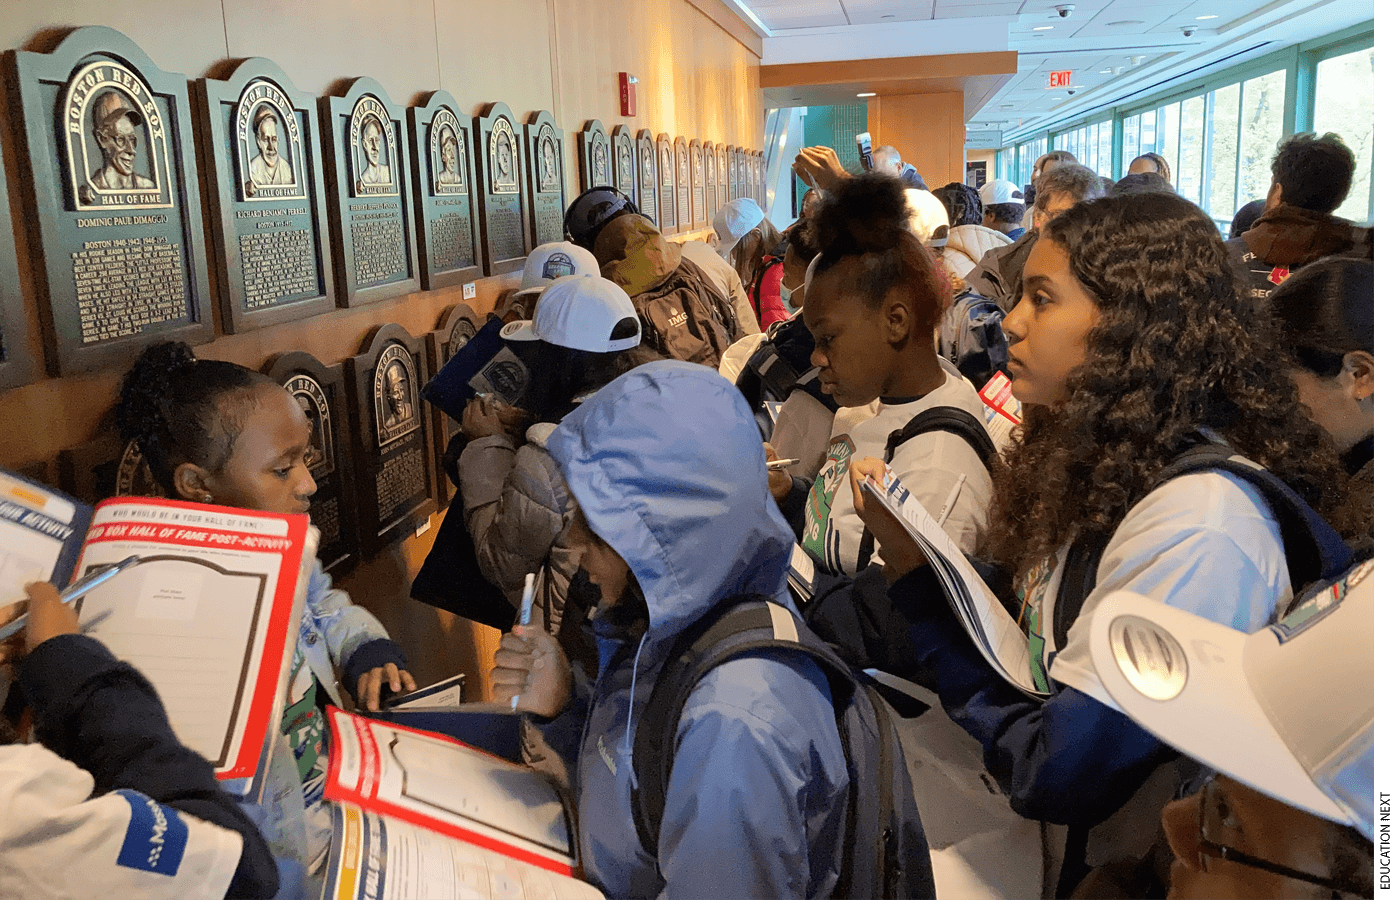 Students from the 6th grade at Nathan Hale School complete a “bingo challenge” as part of the Red Sox Hall of Fame stop on their guided tour of the Fenway Park Learning Lab.